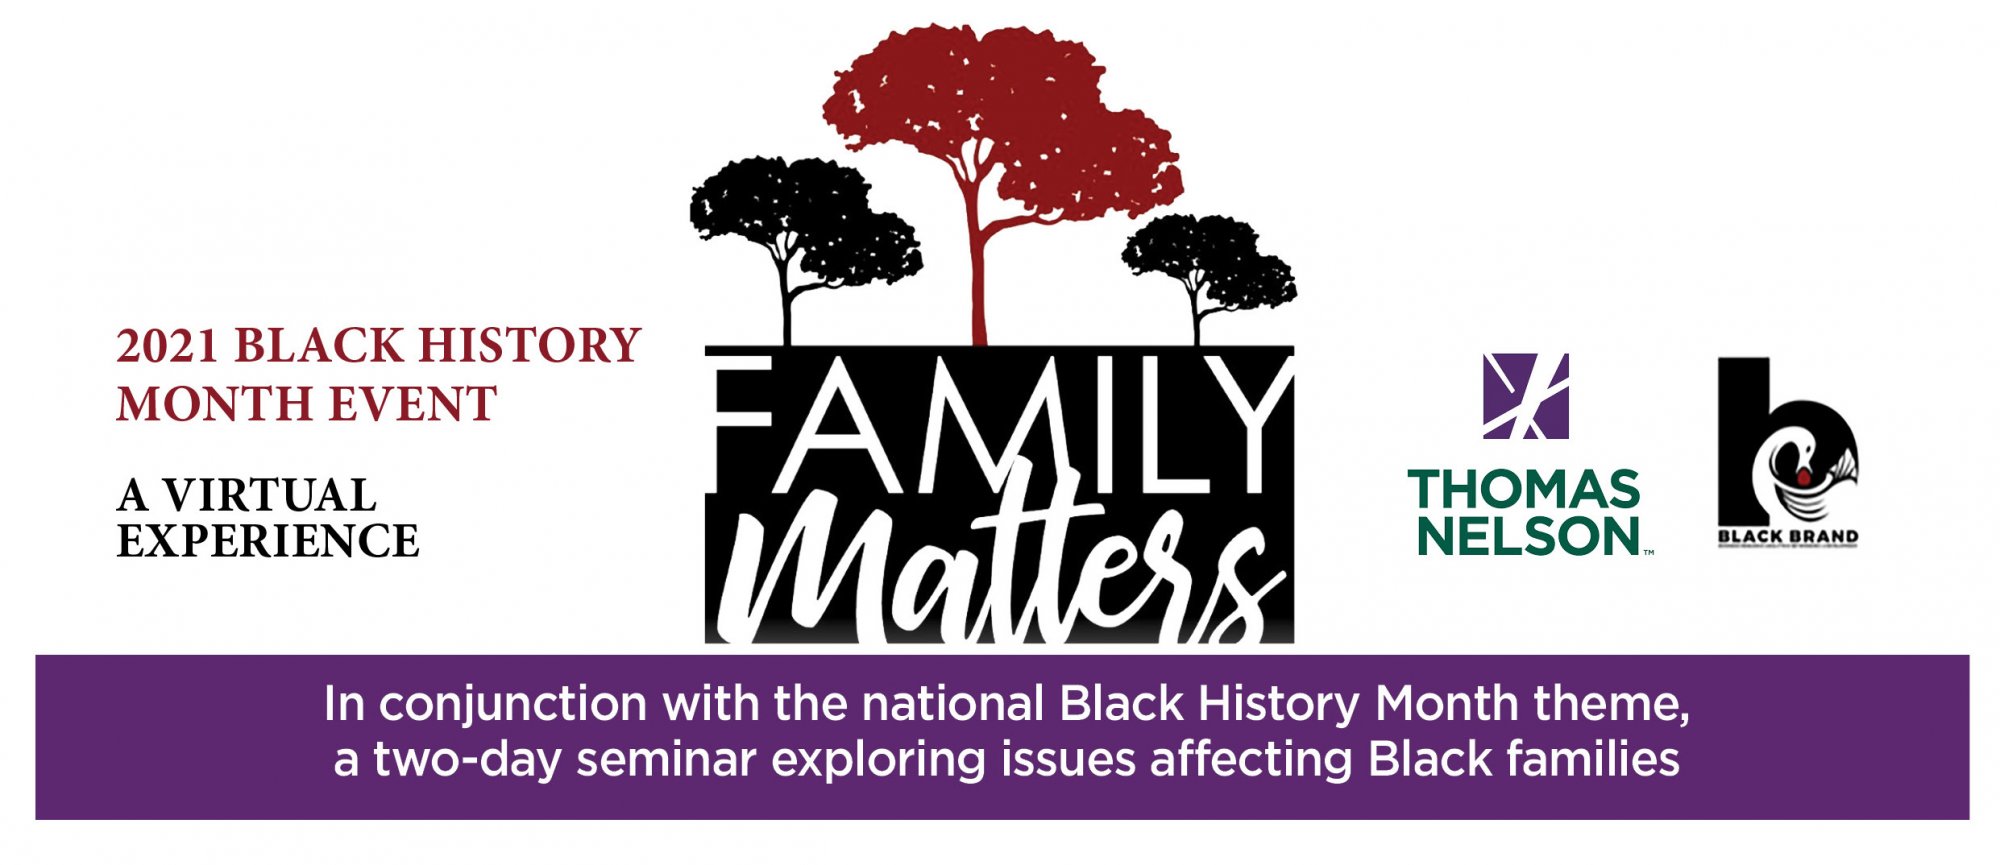 Image for Two-Day BHM Seminar Explores Family Matters